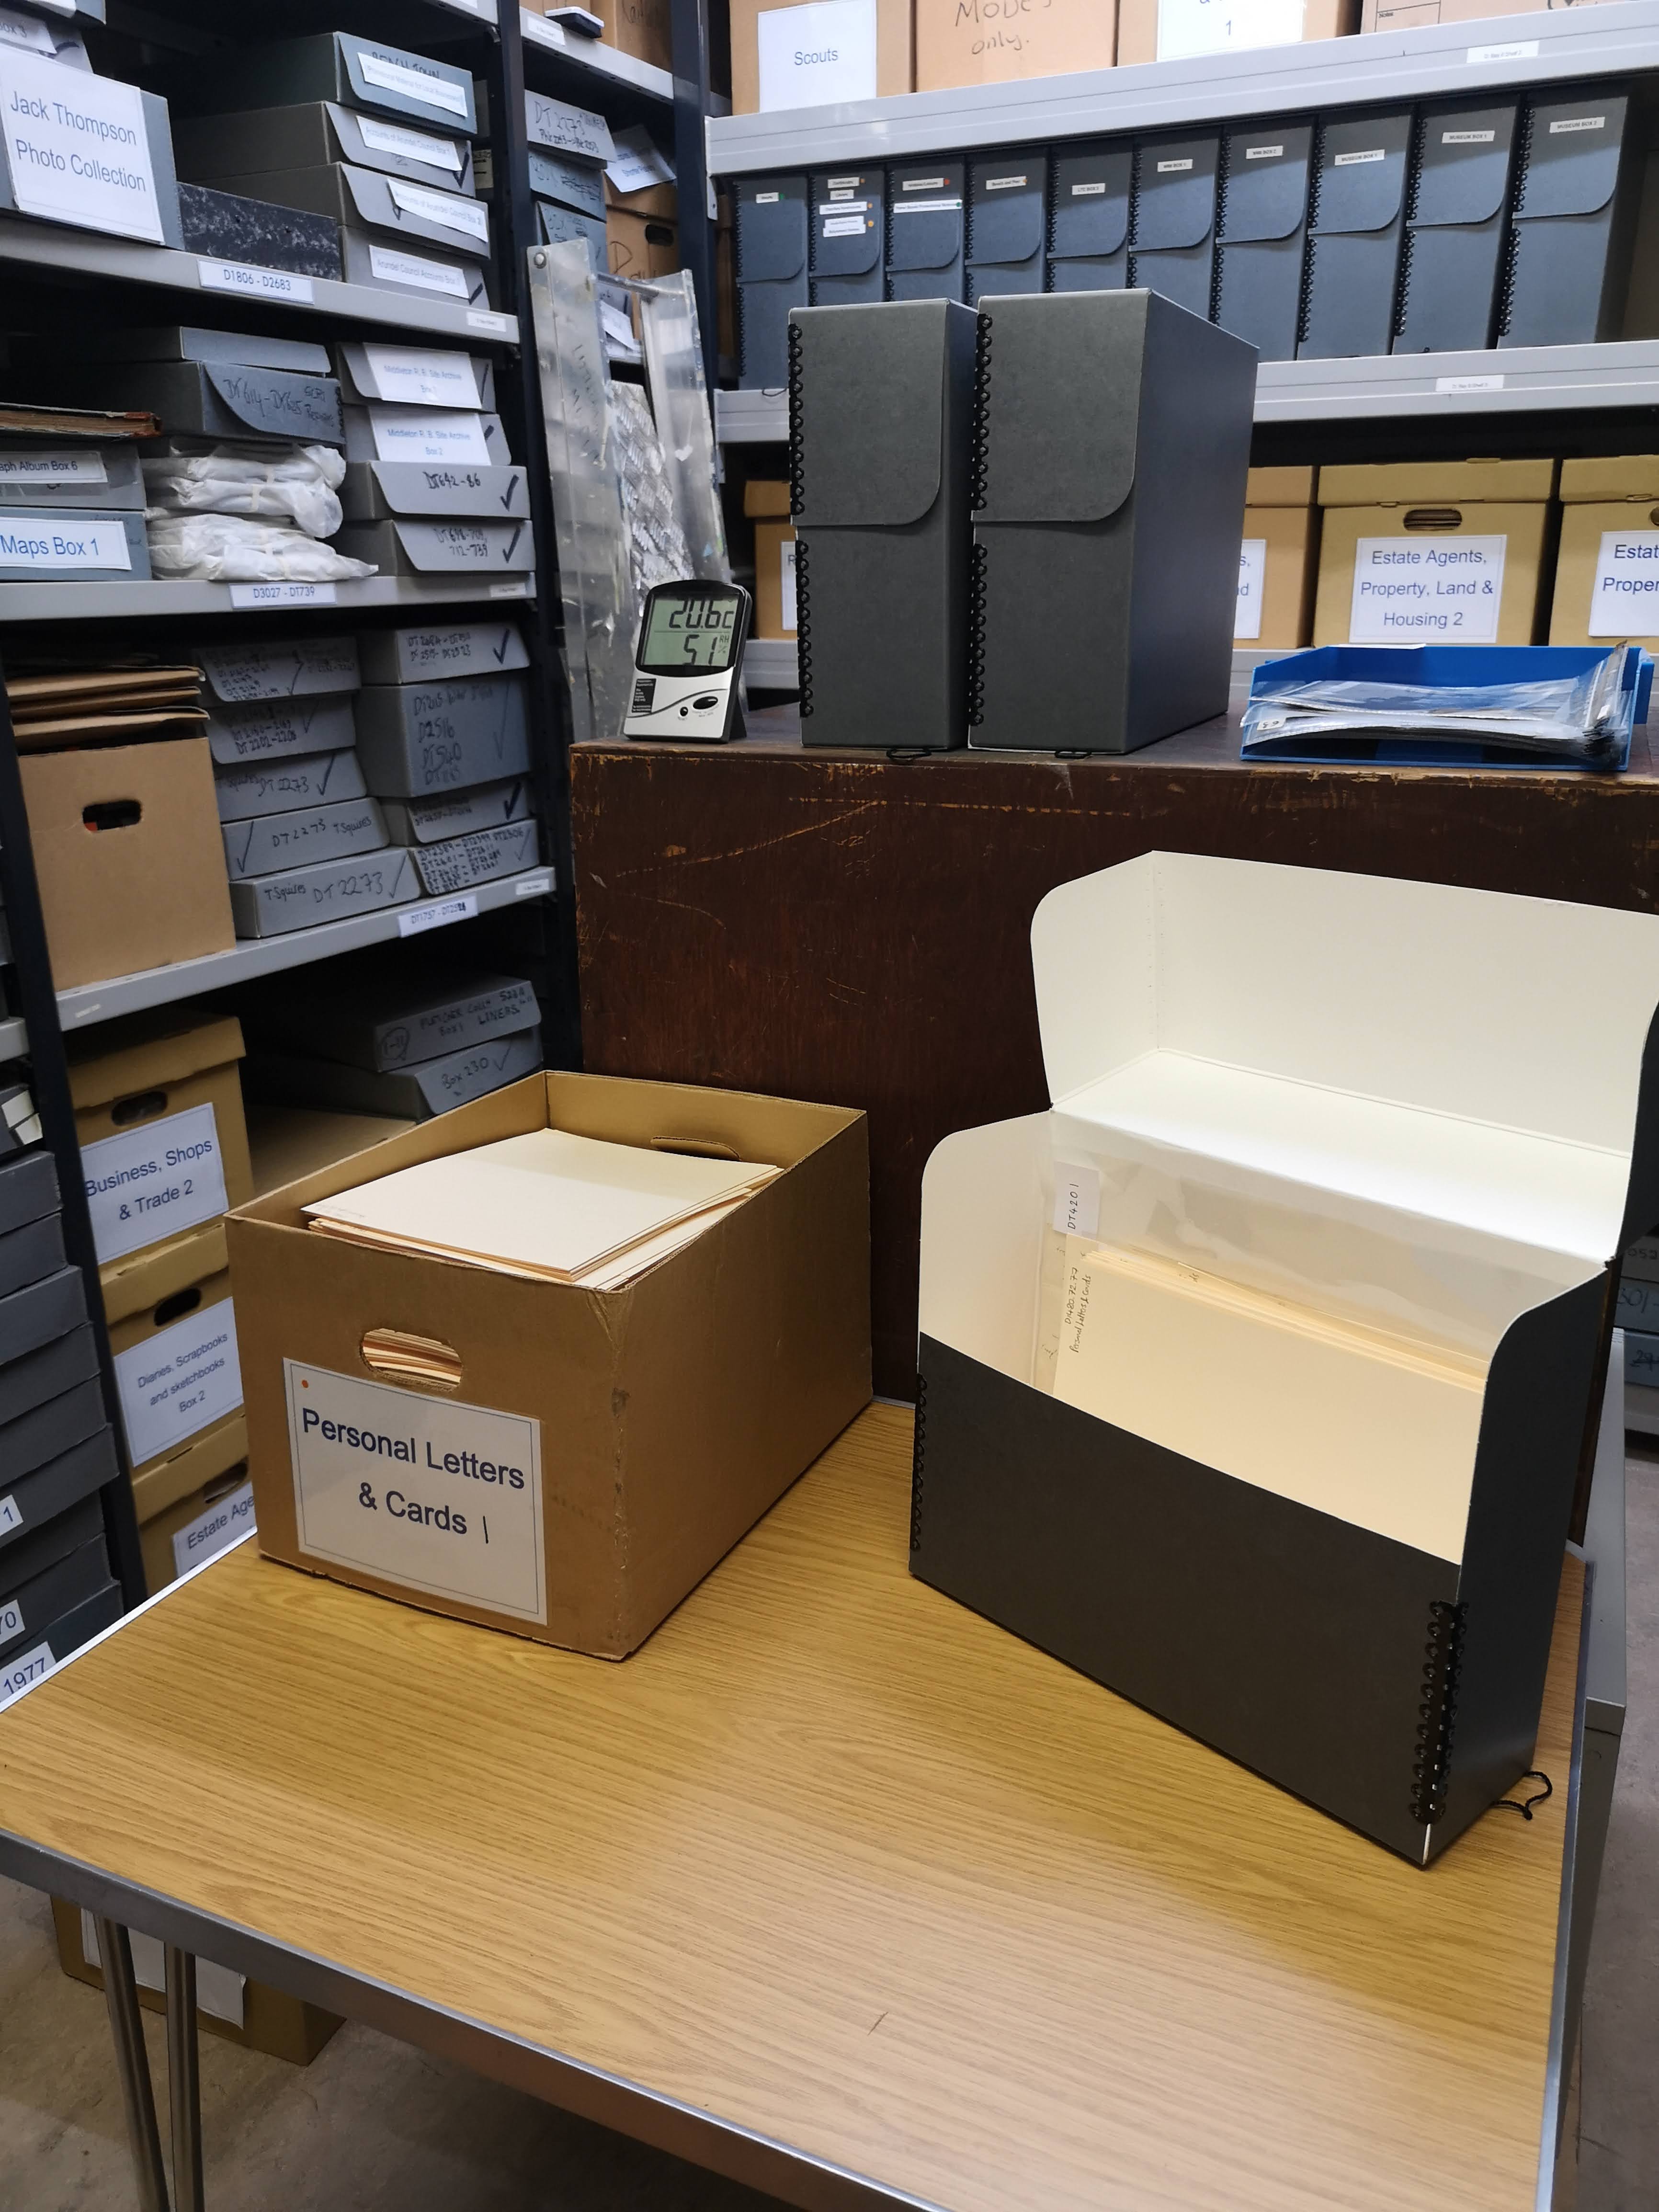 Store room at Littlehampton Museum showing boxes of files